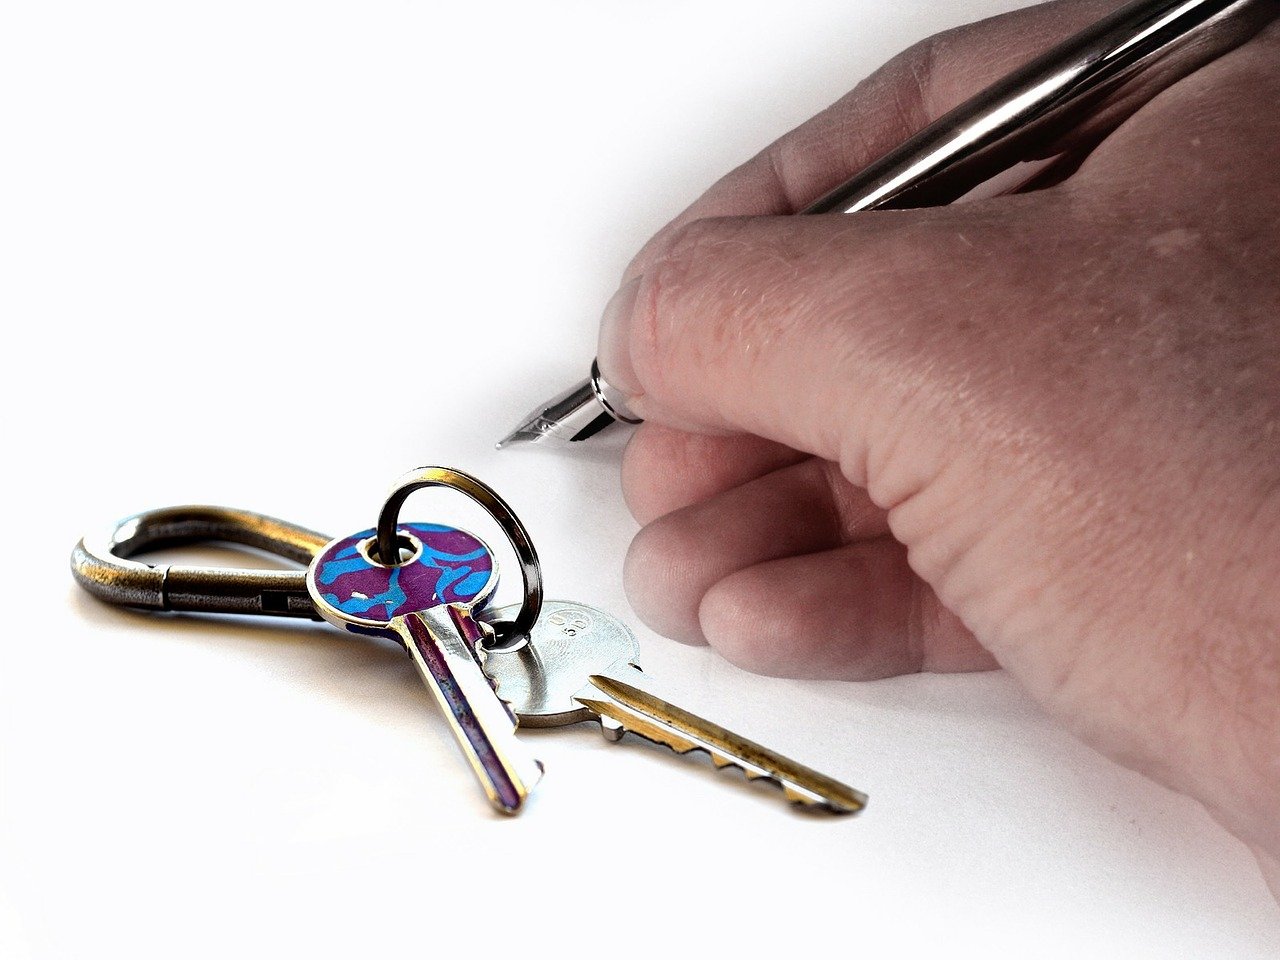 Estate Agents Questions to Ask - Keys